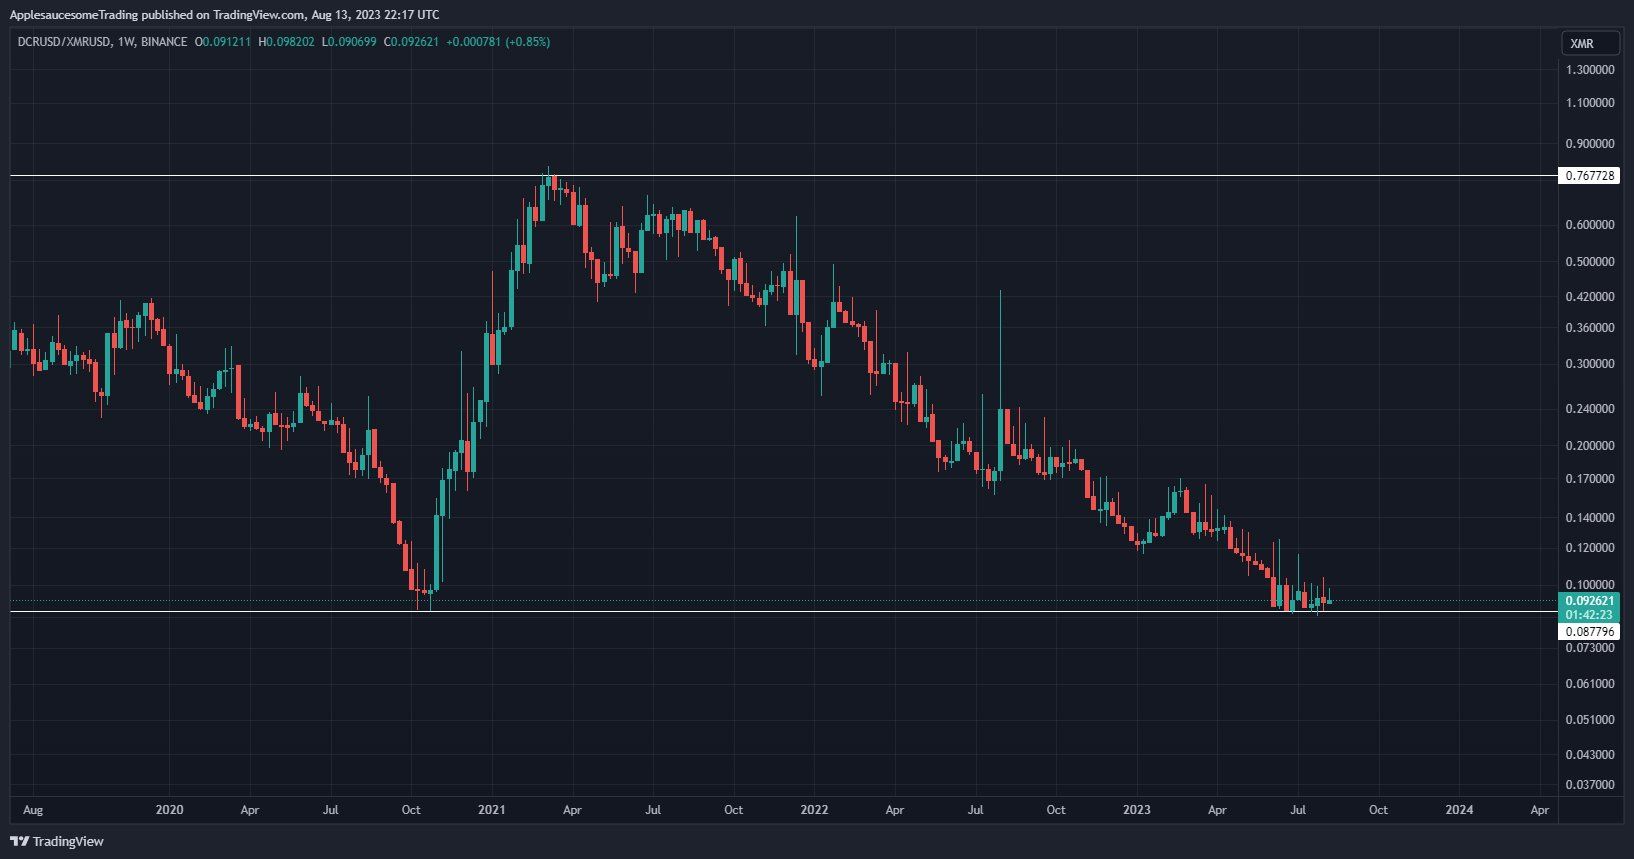 DCR is at a "long time" low vs XMR